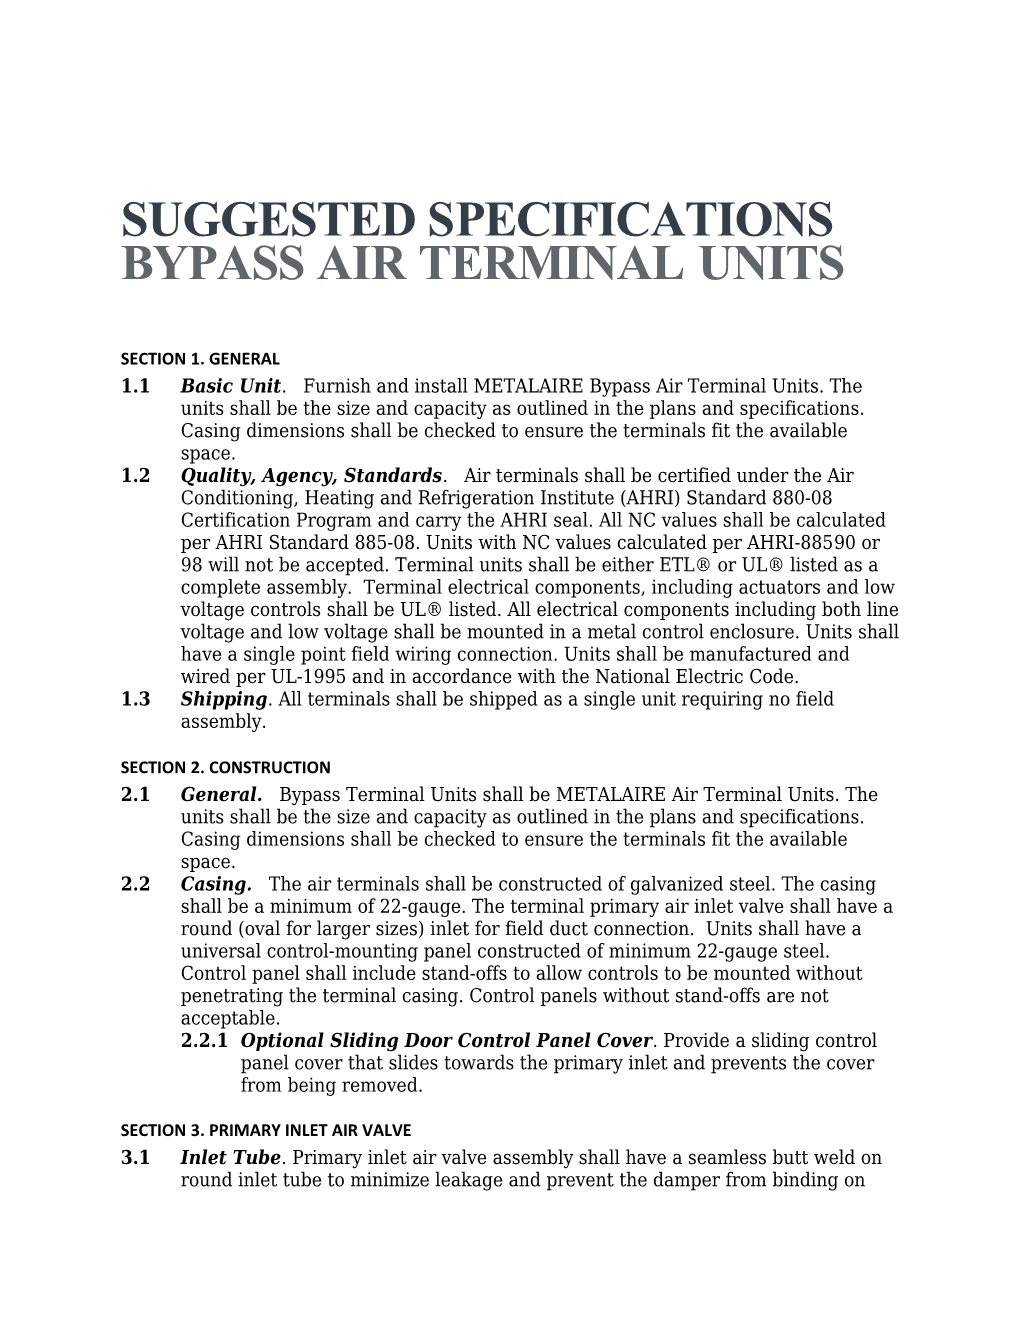 Suggested Specifications Bypass Air Terminal Units